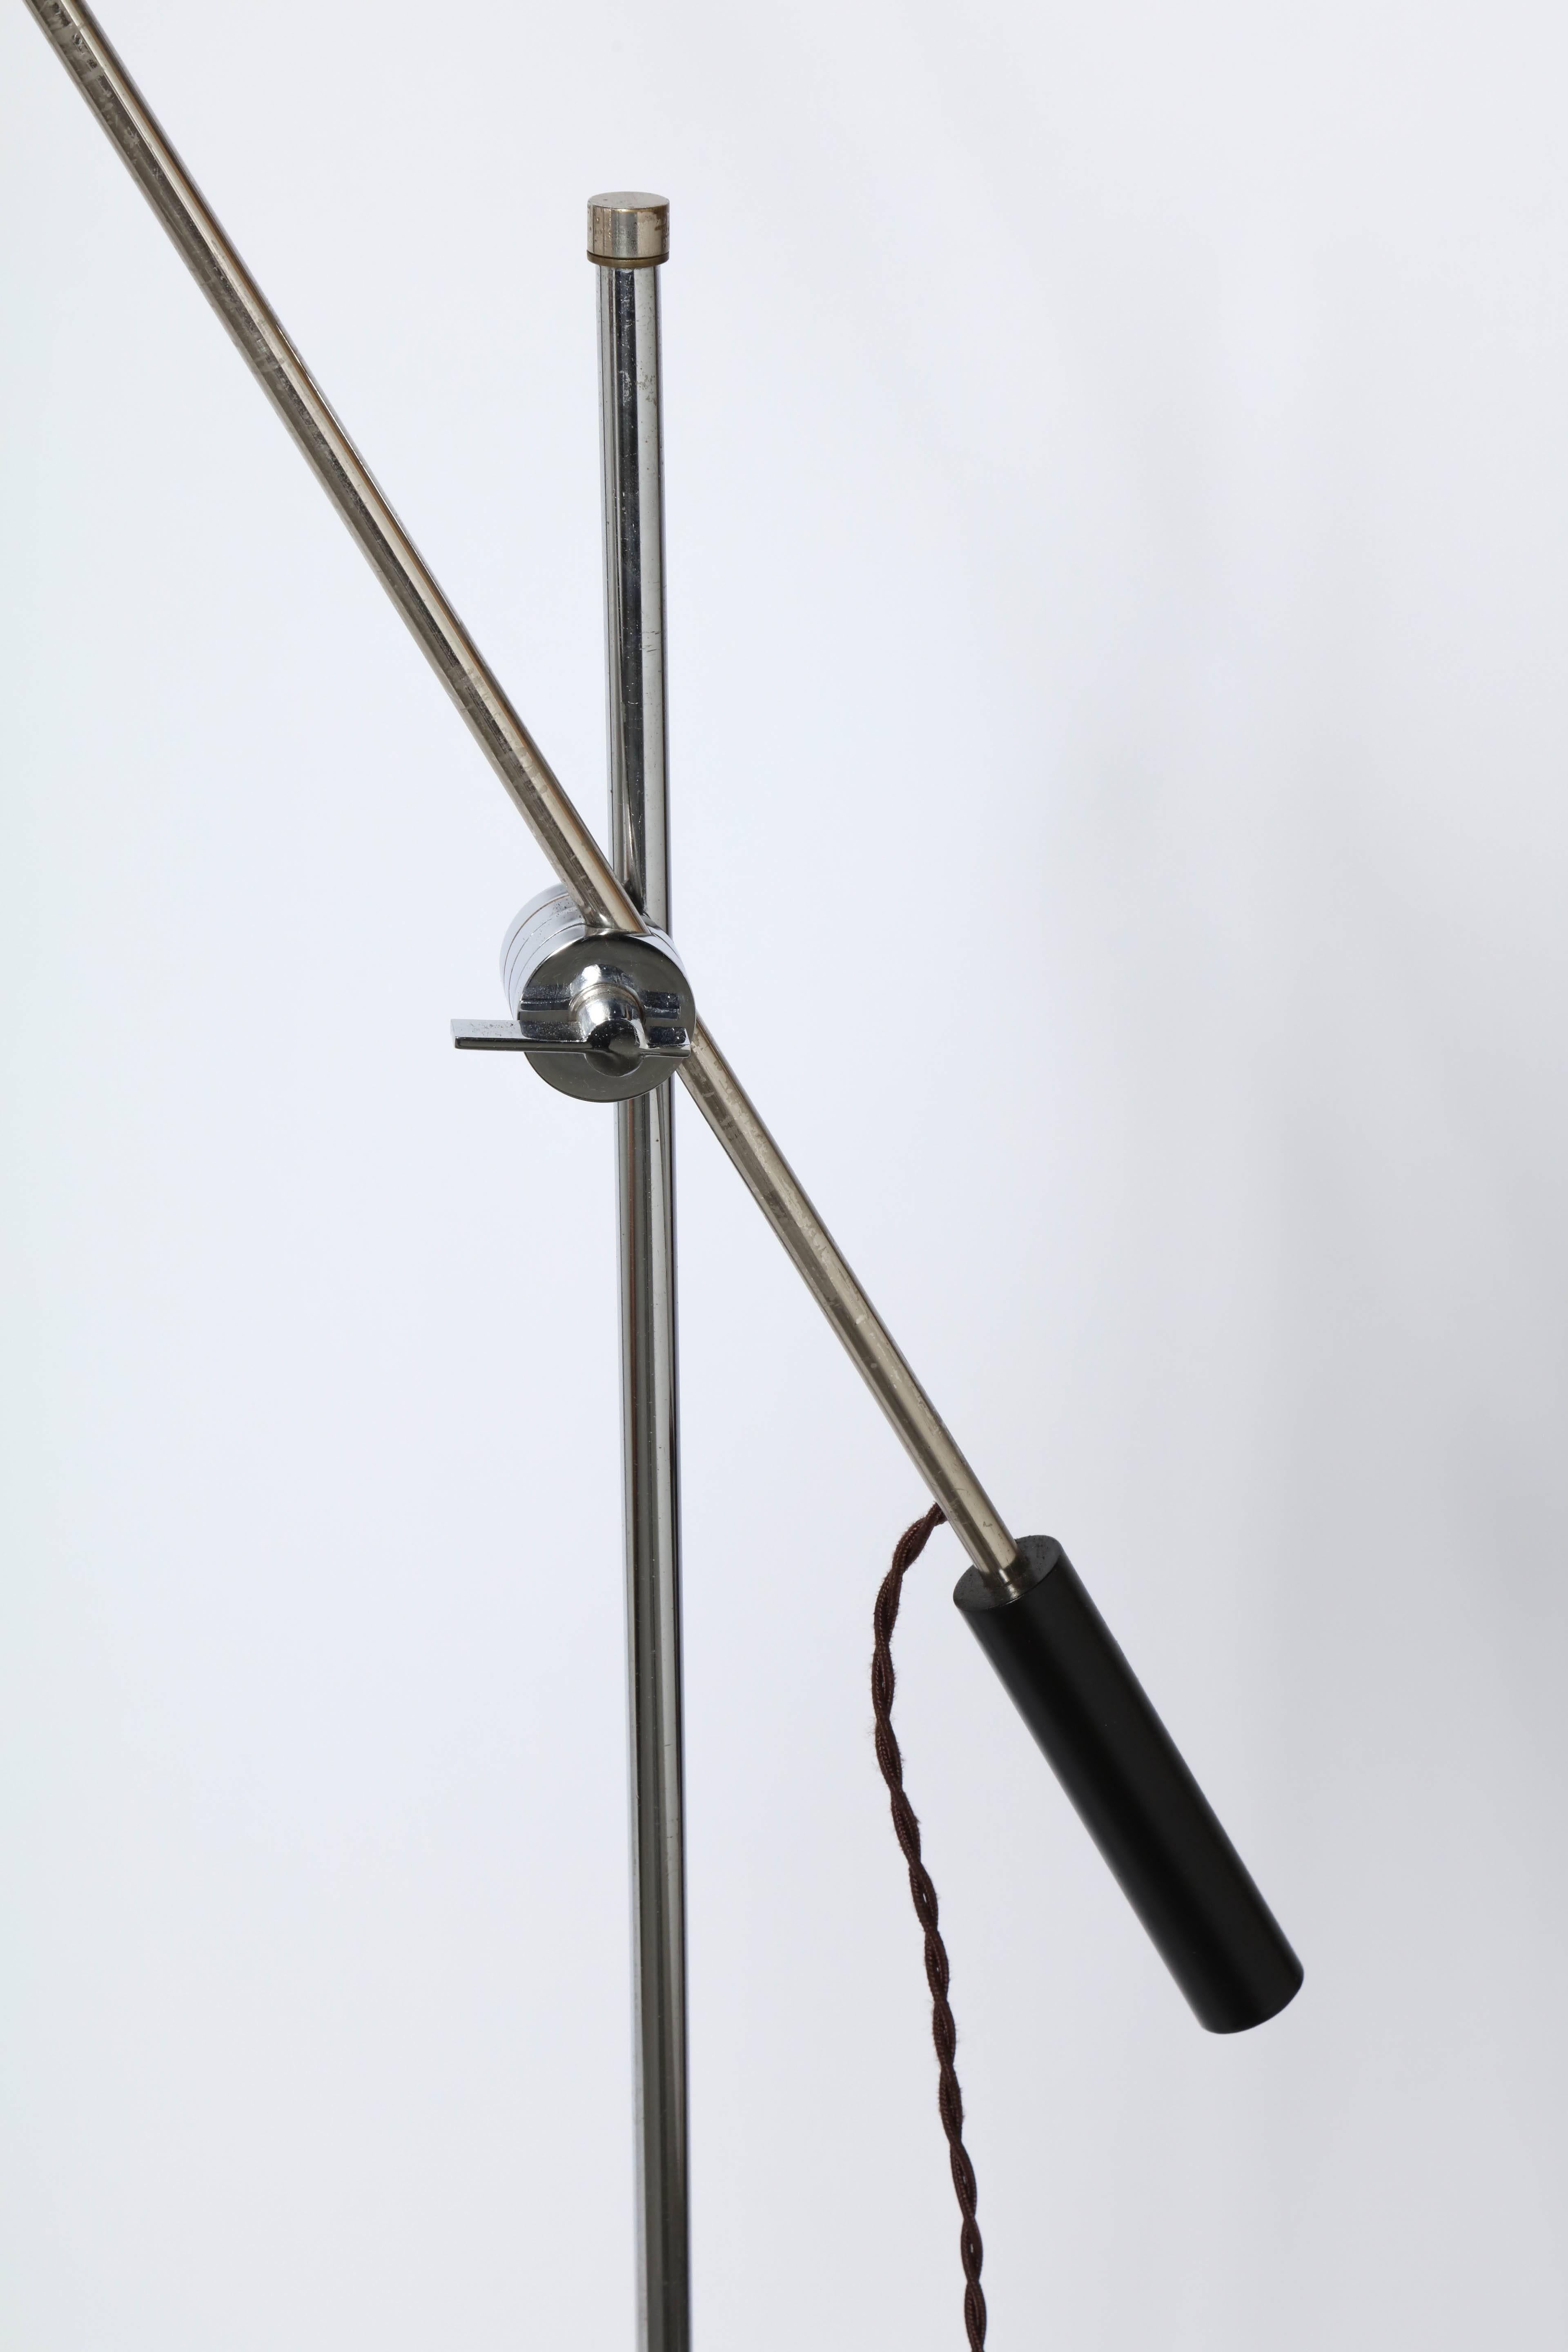 American Mid-Century Modern articulating Robert Sonneman attributed Laurel Lamp Co. Chrome and black enameled floor lamp. With black handle, base and shade. Featuring a 46H tubular chrome column, 40L adjustable black handled arm and adjustable knob.